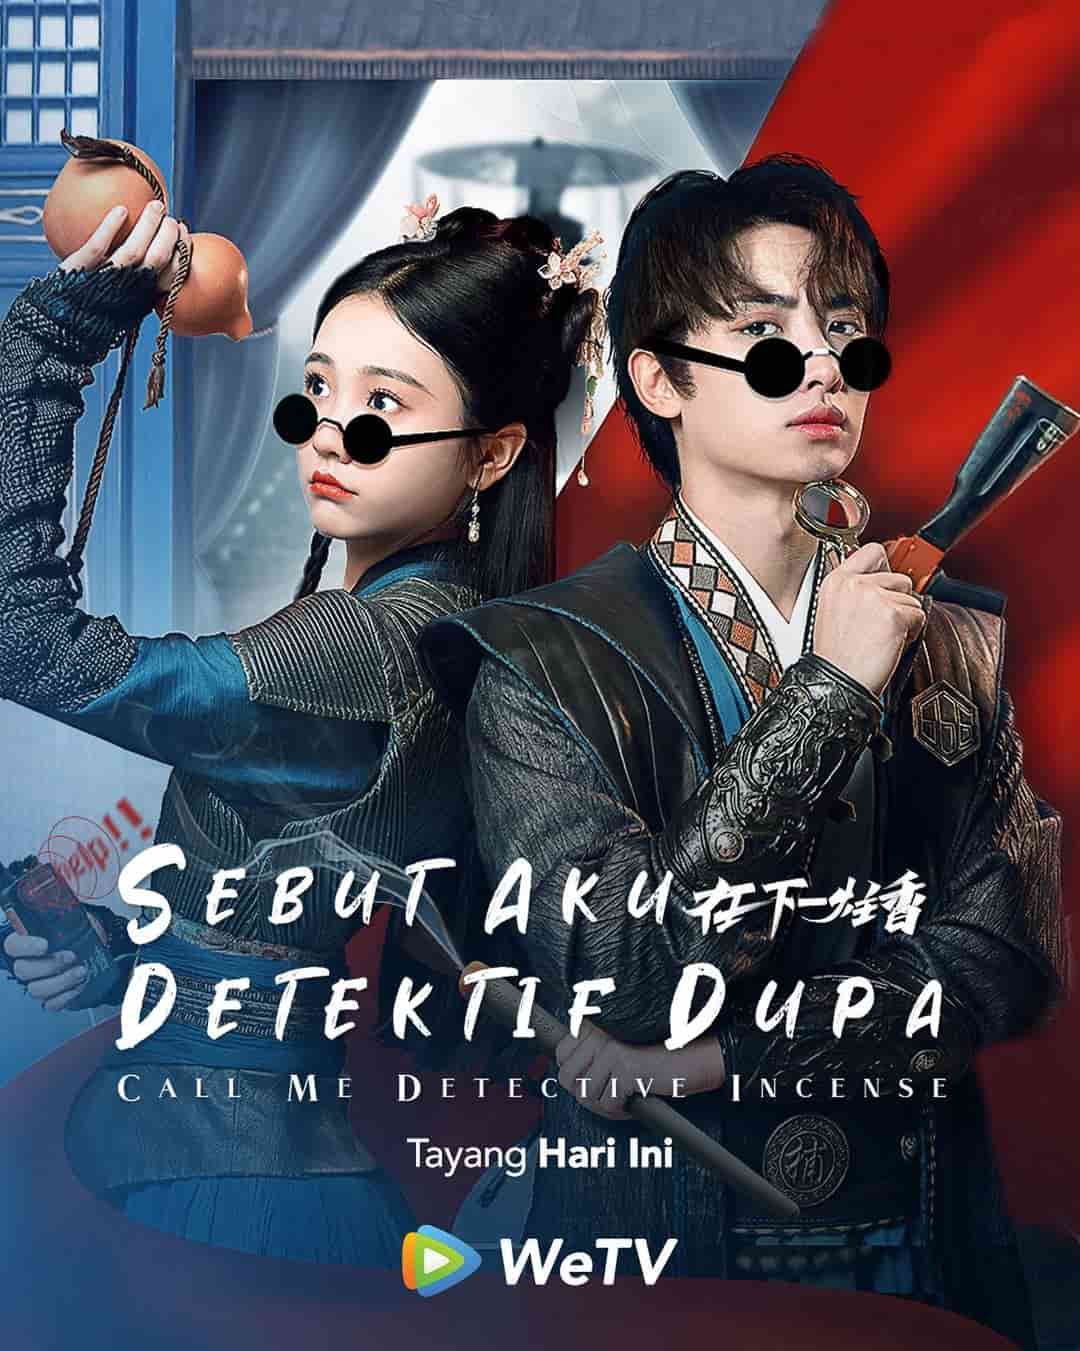 Call Me Detective Incense - Sinopsis, Pemain, OST, Episode, Review